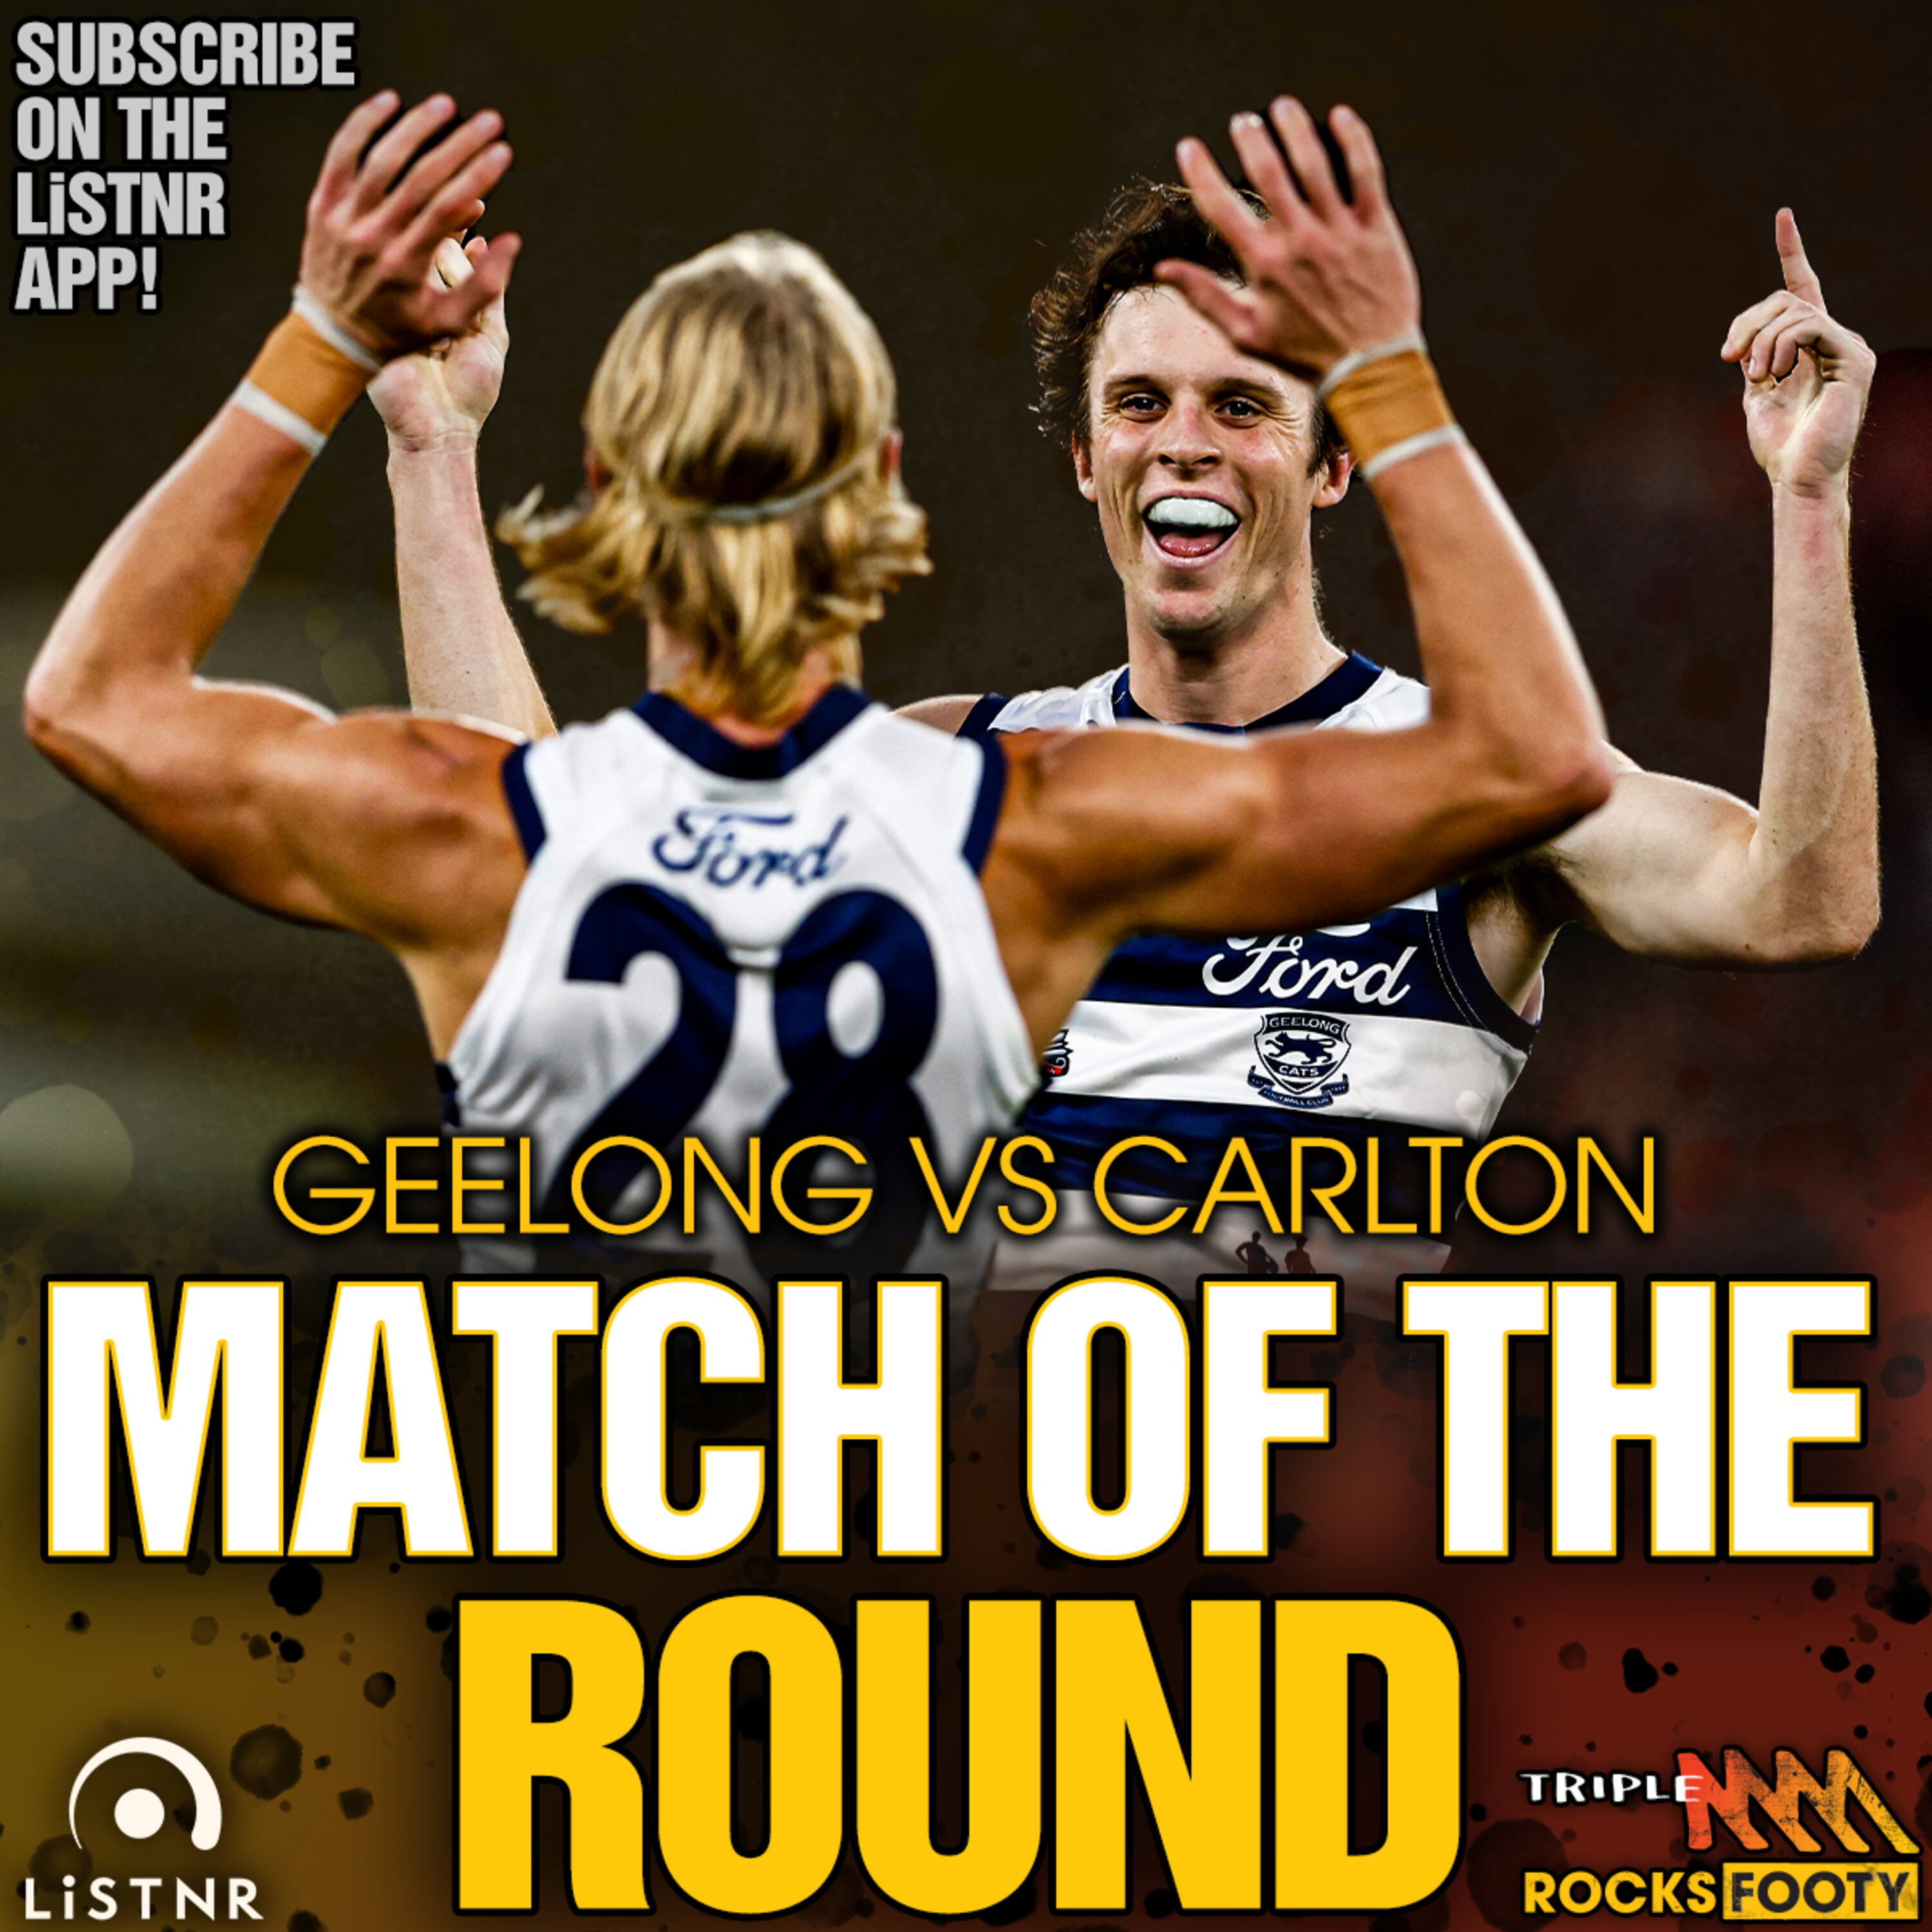 MONDAY MINI-MATCH | Geelong v Carlton: Cats hold off fast finishing Blues to stay undefeated in high scoring clash at the Triple MCG